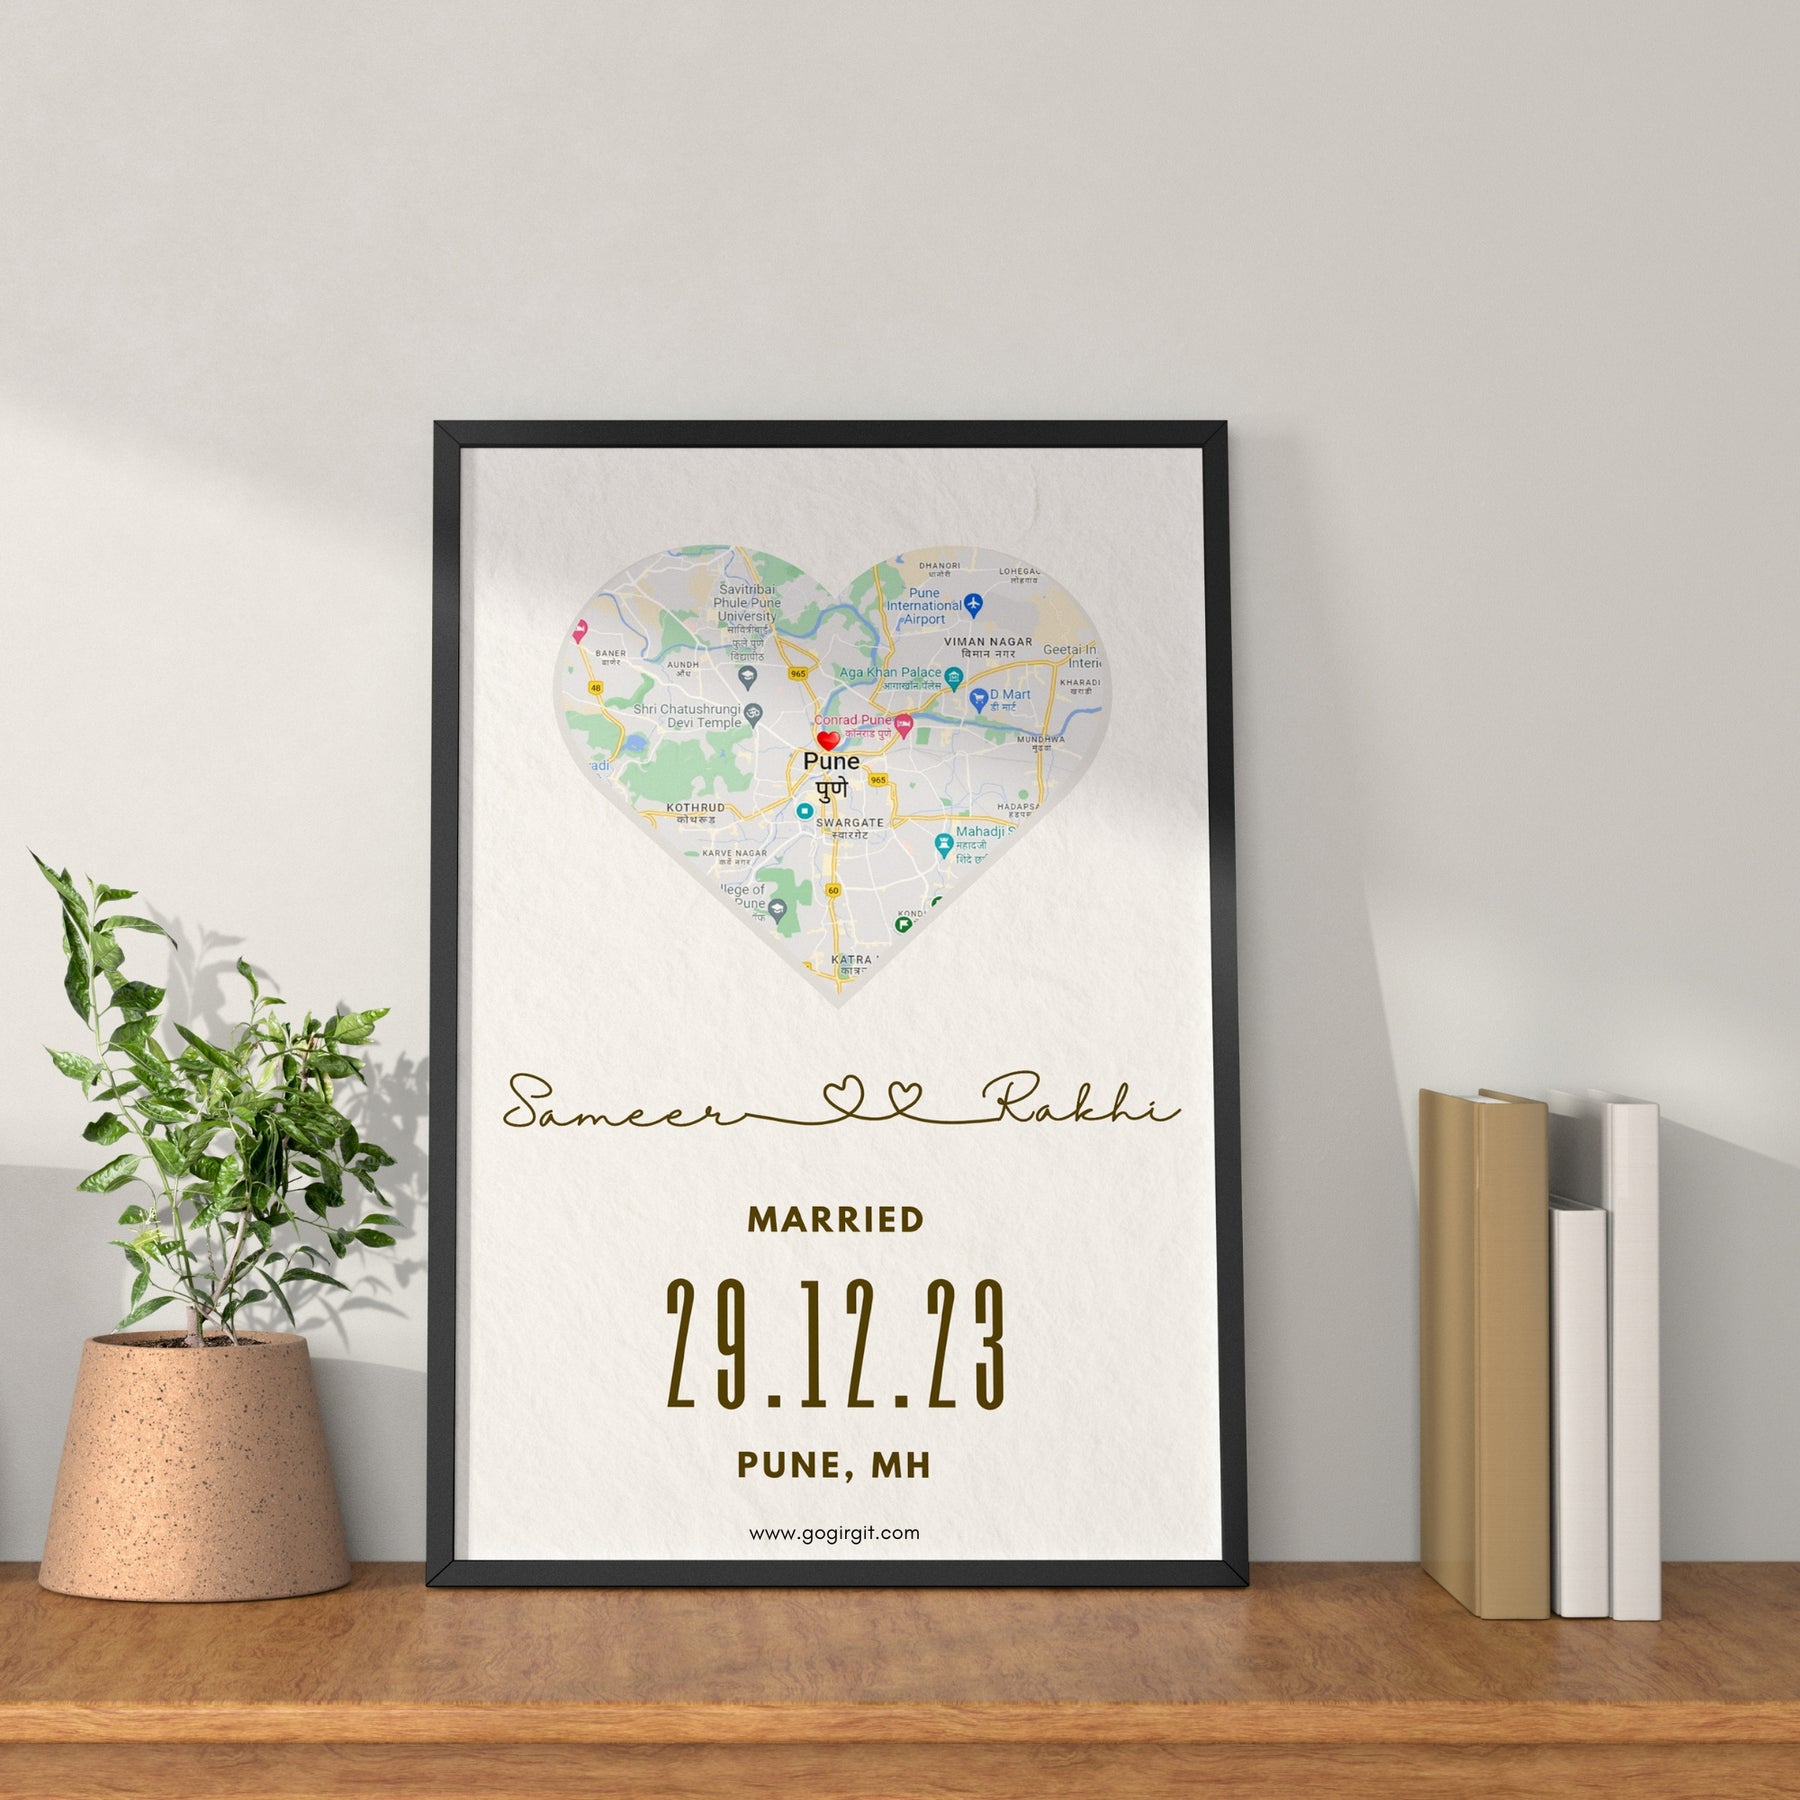 Personalised-Special-Place-Map-Names-Date-Poster-Frame-Gogirgit-1